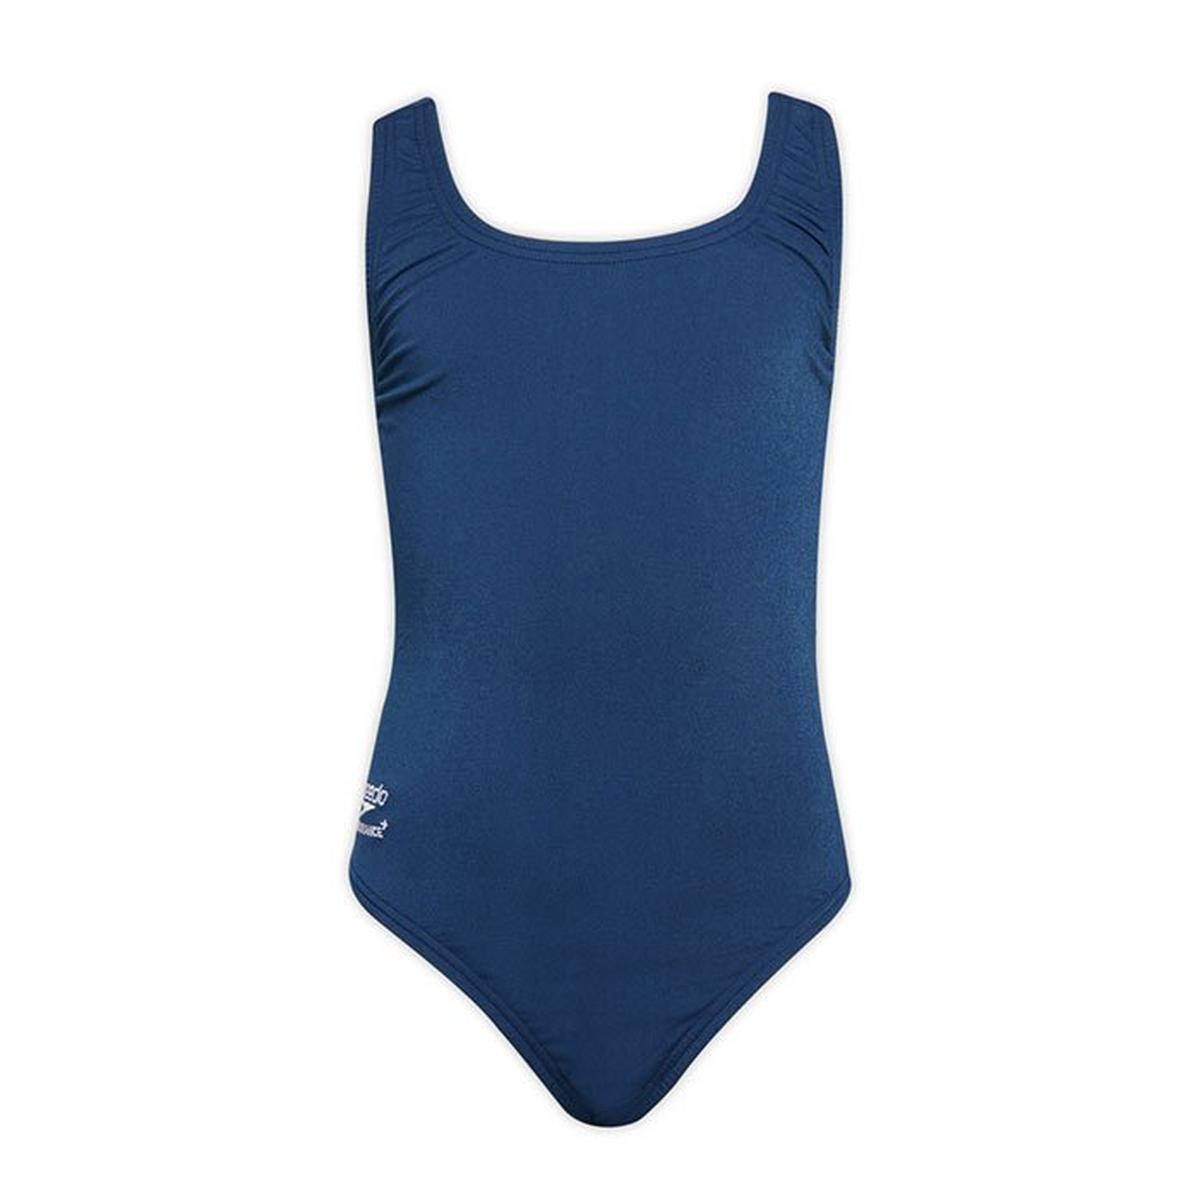 Junior Girls' [7-16] Solid Super Pro Back One-Piece Swimsuit